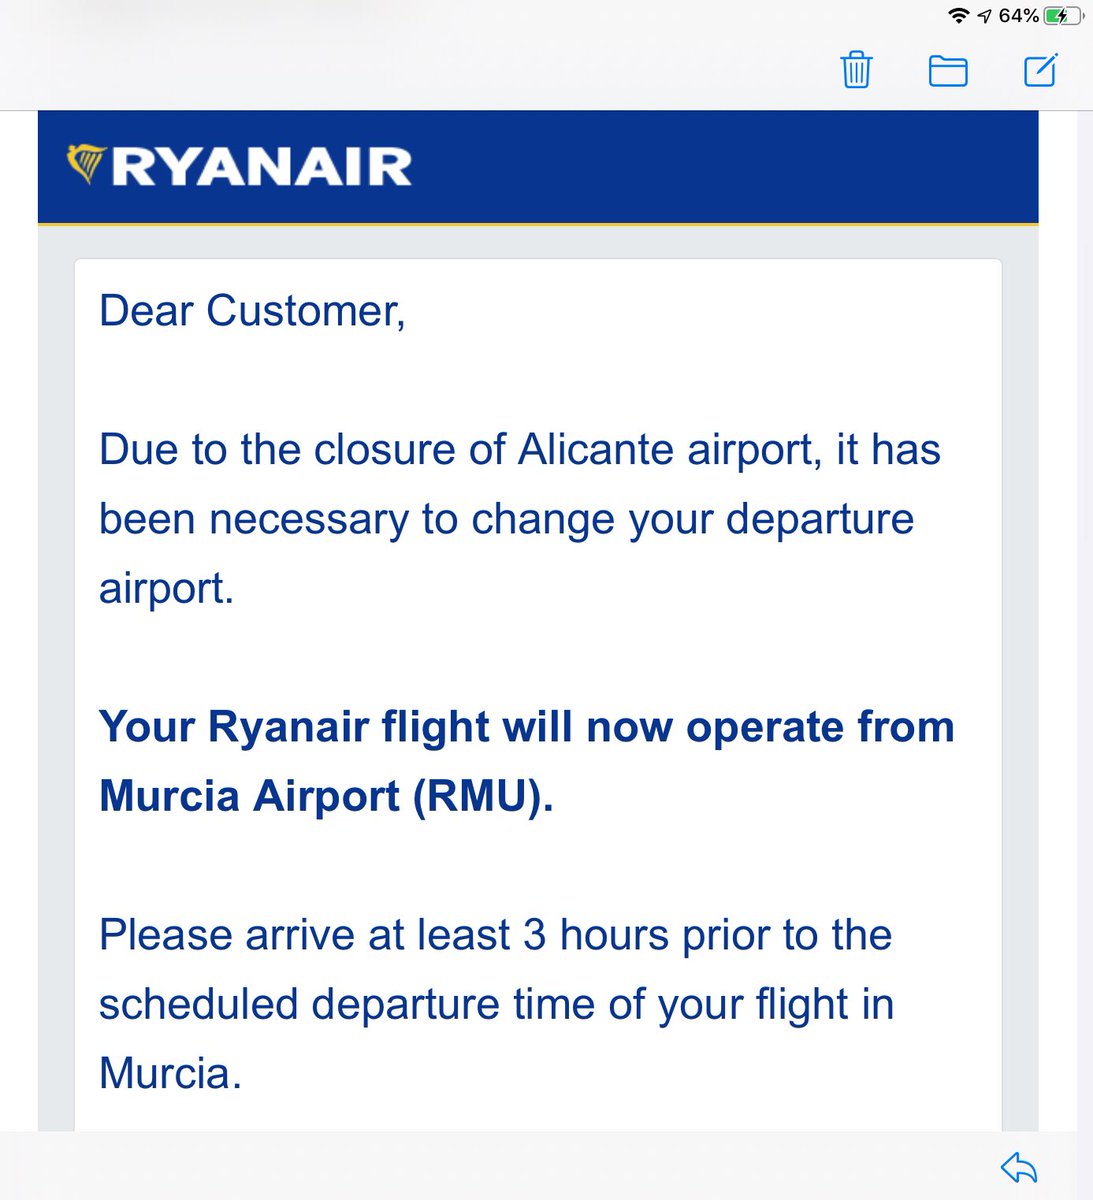 Ryanair on Twitter: "@LoliLondon HI Lolita, your flight is not affected. If there's ant change on your flight you will be notified by SMS email. Hugo" / Twitter